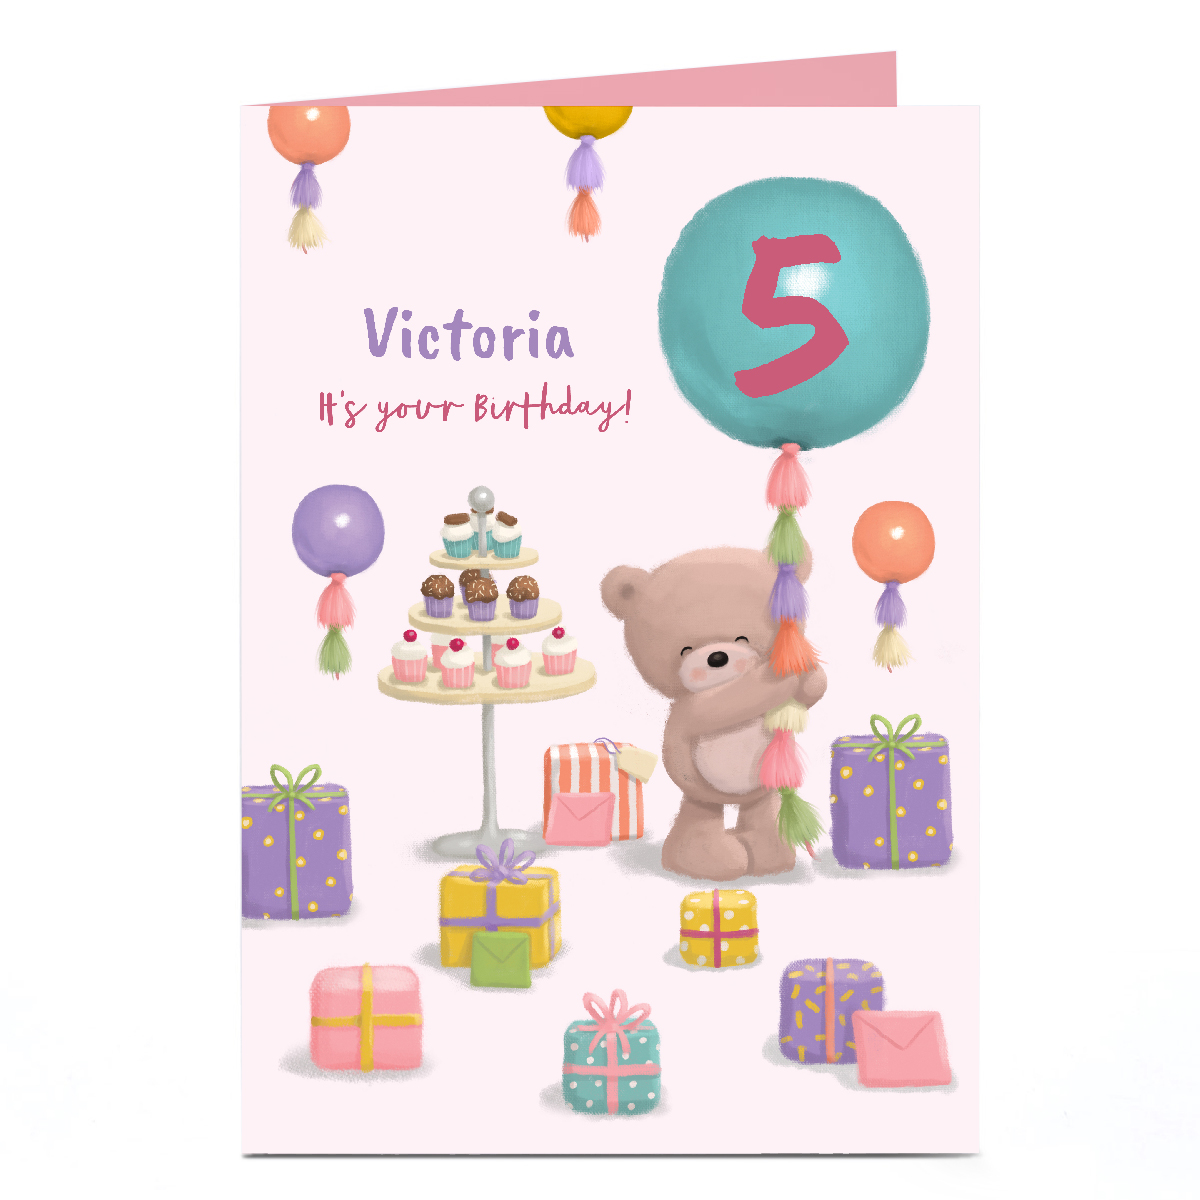 Personalised Hugs Birthday Card - Cakes and Presents, Editable Age